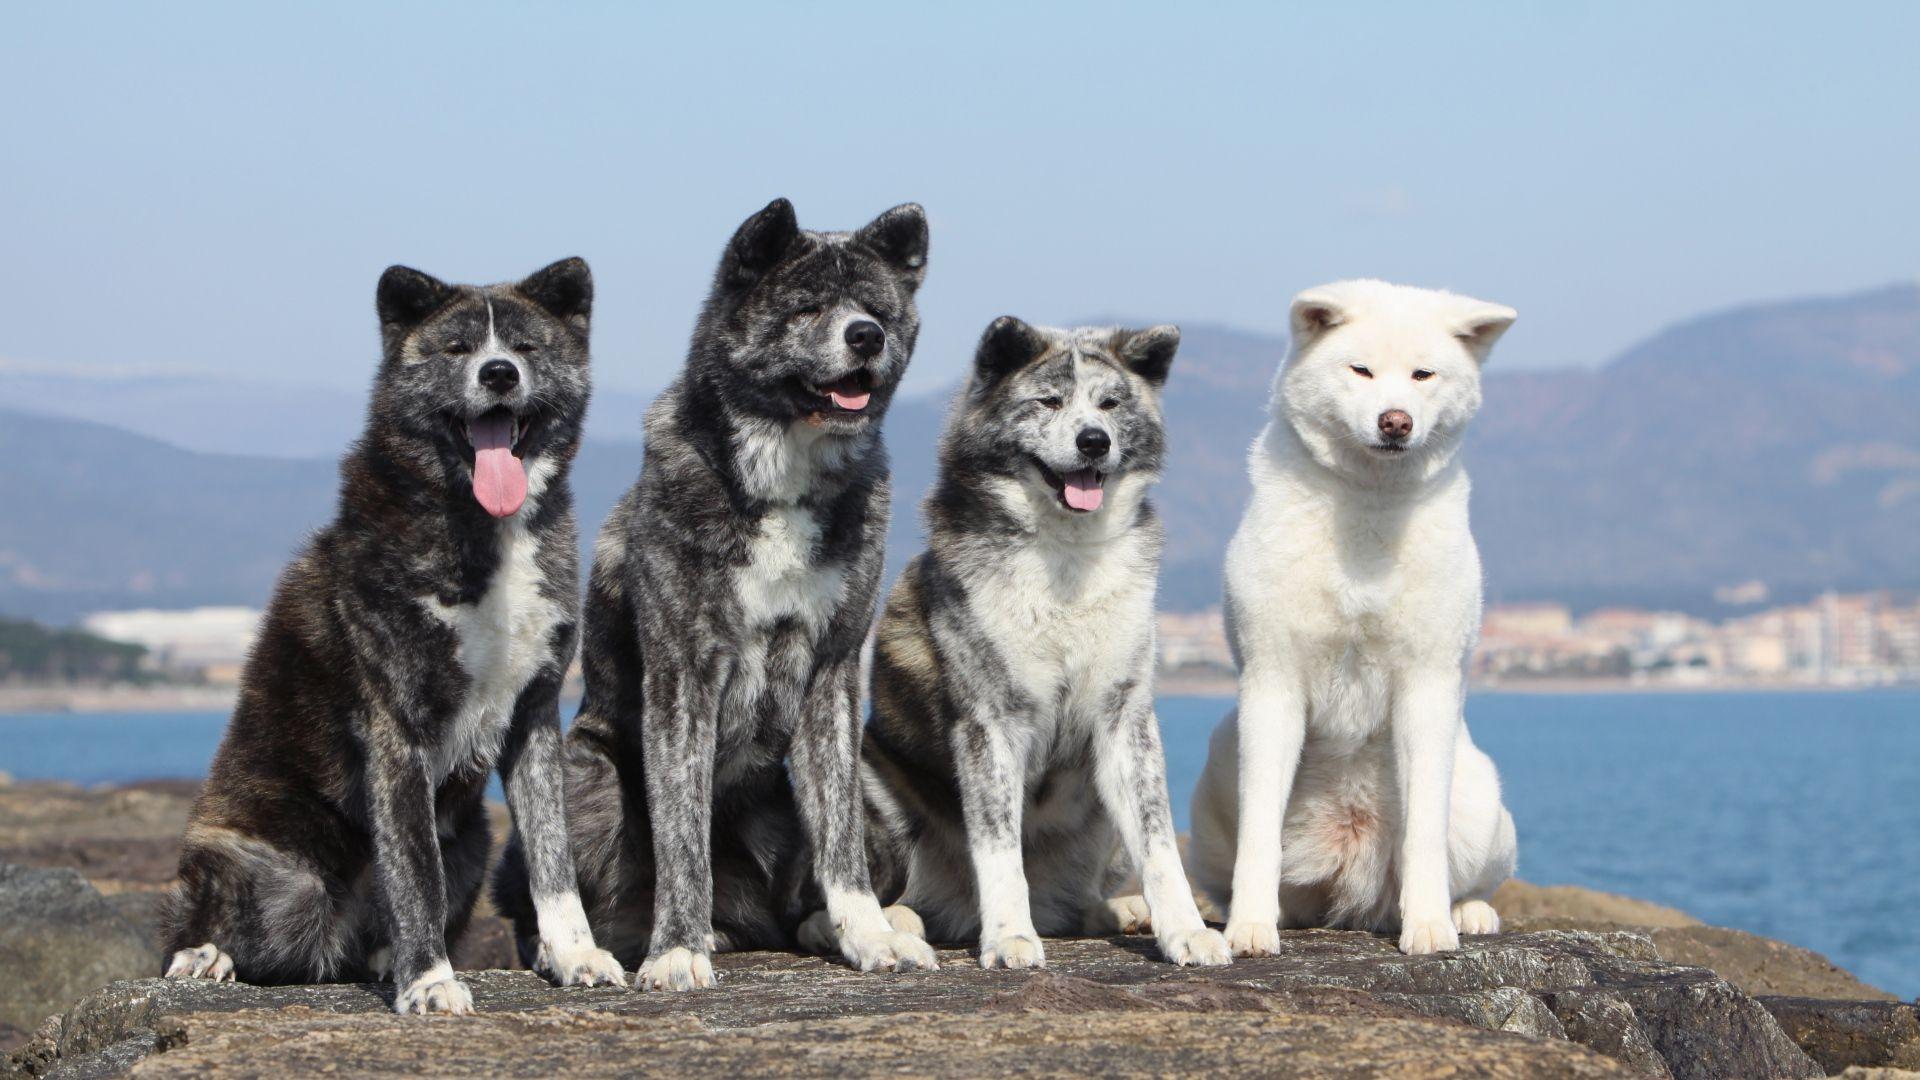 Download Wallpaper 1920x1080 akita inu, dogs, spotted, slope Full